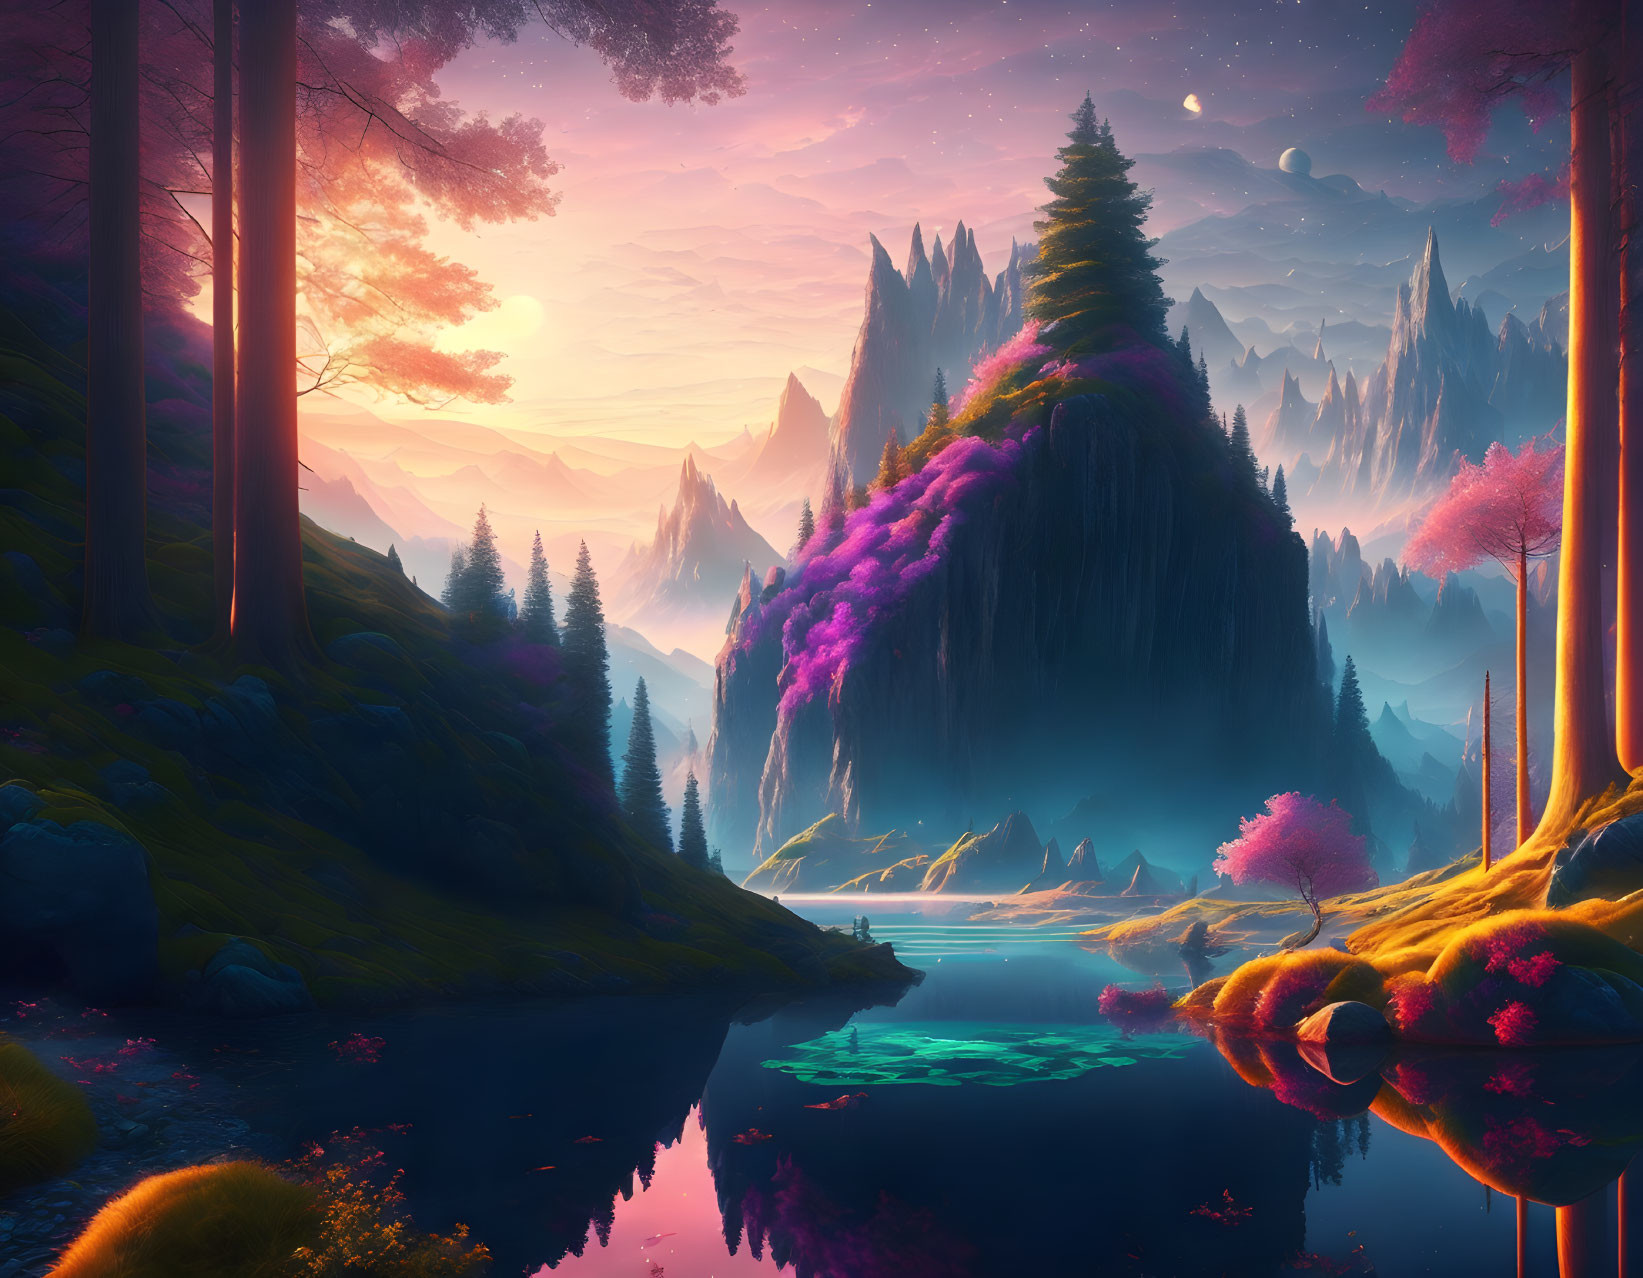 Fantasy landscape with pink skies, purple flora, river, and towering trees at dusk or dawn